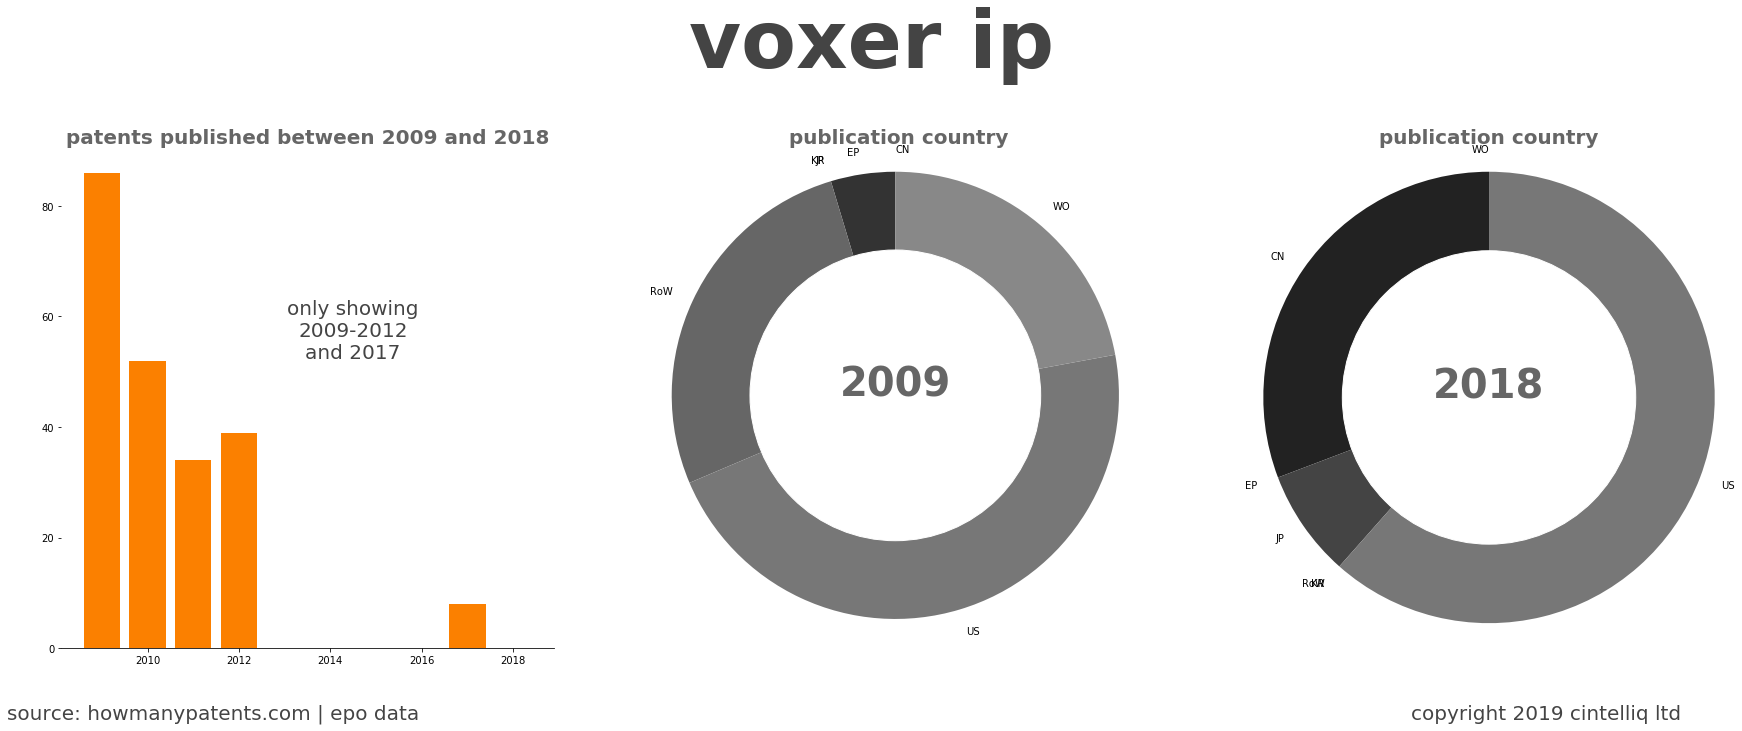 summary of patents for Voxer Ip